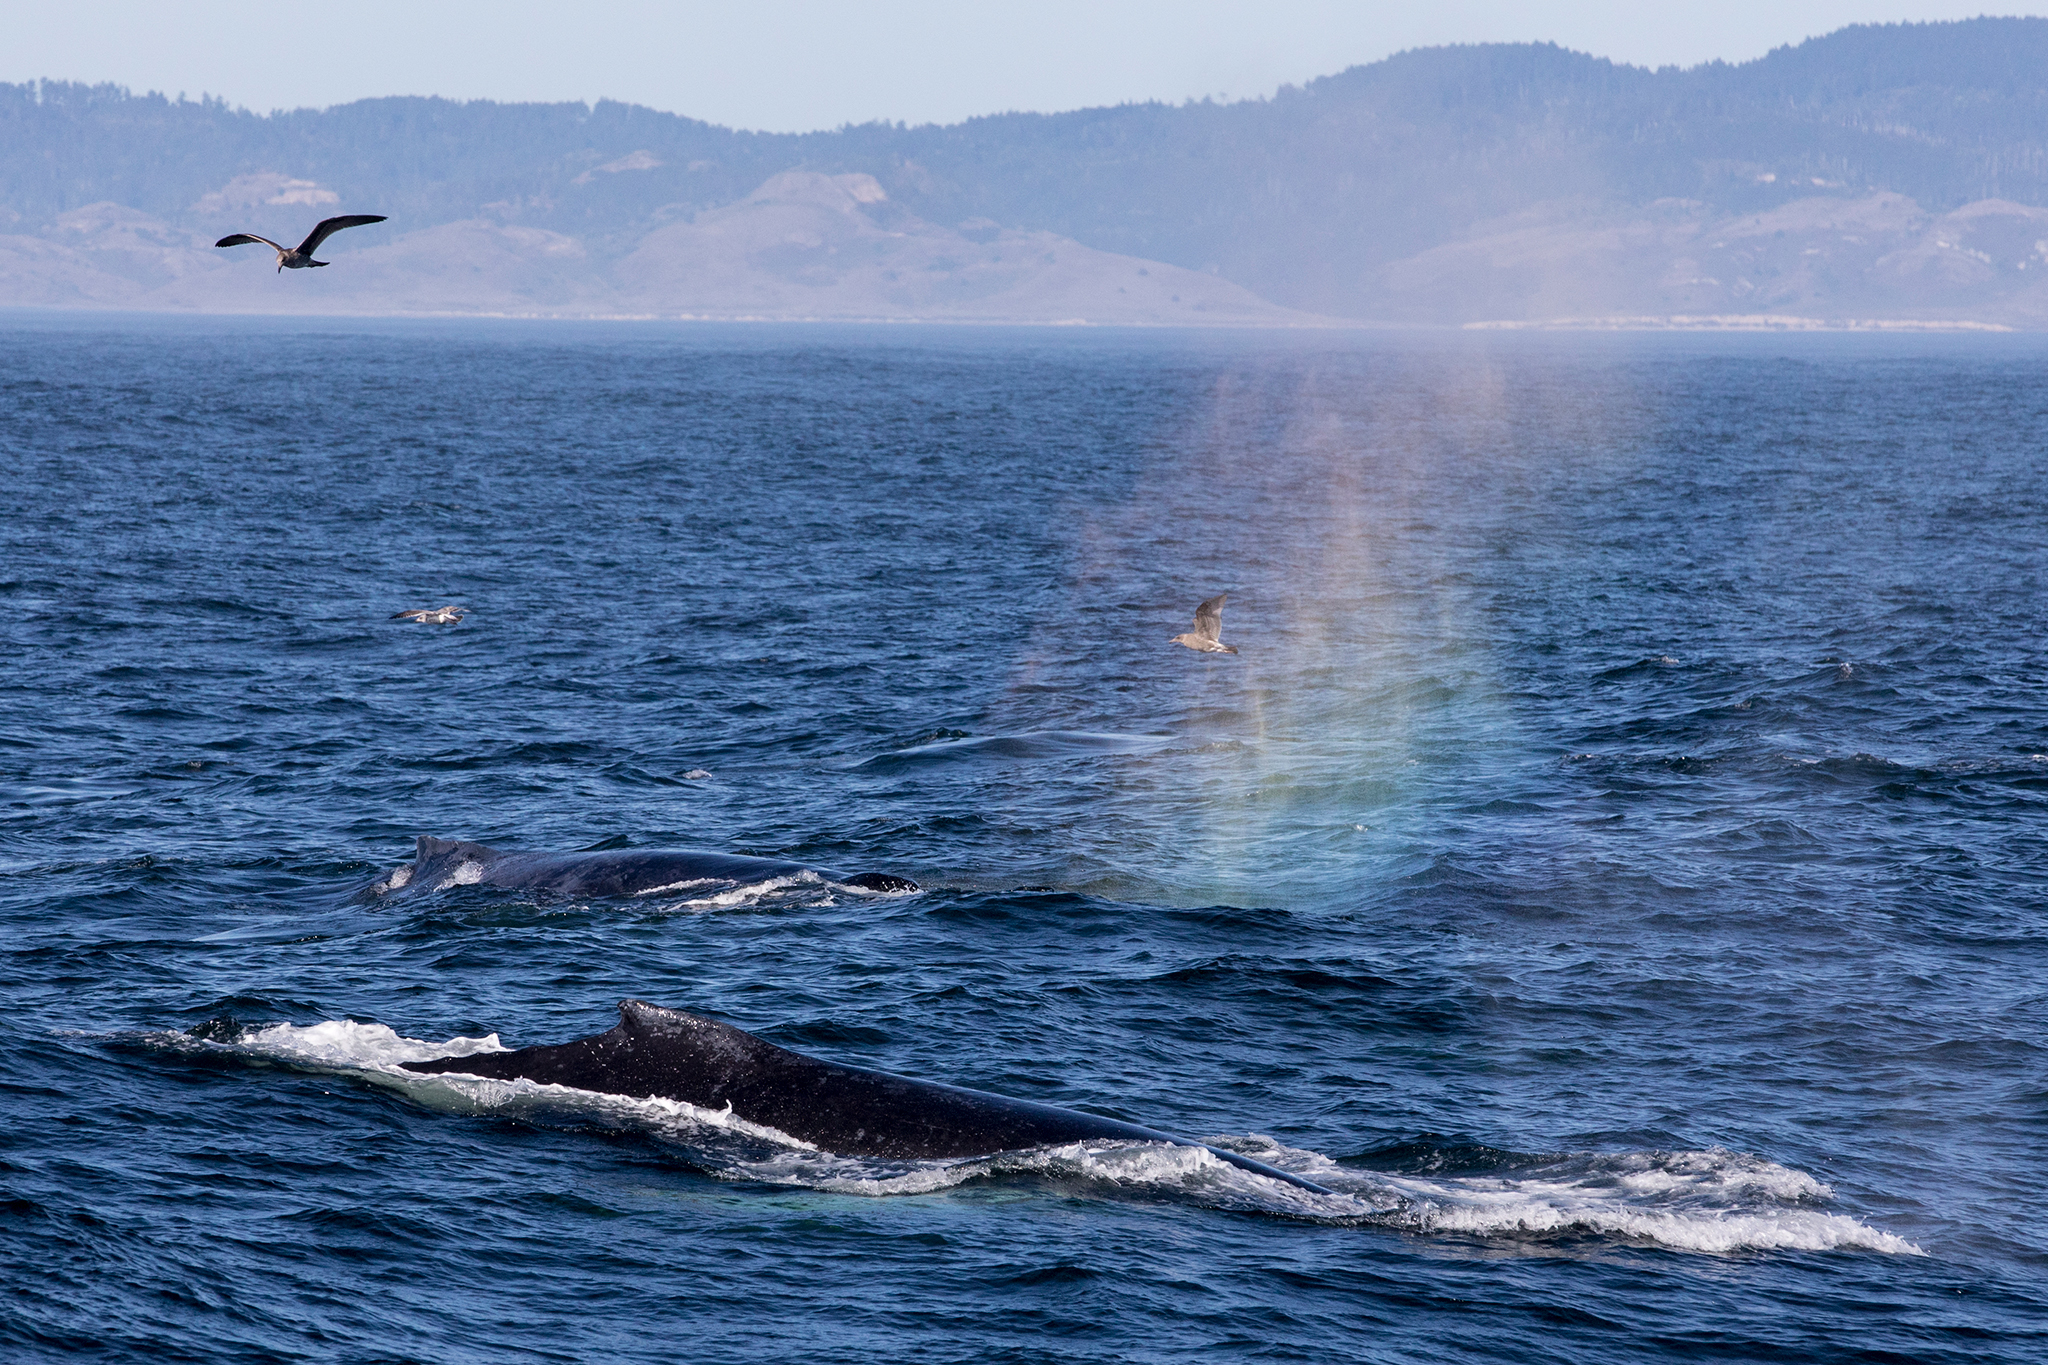 ‘Whales are out in force’ off SF Bay Area coast